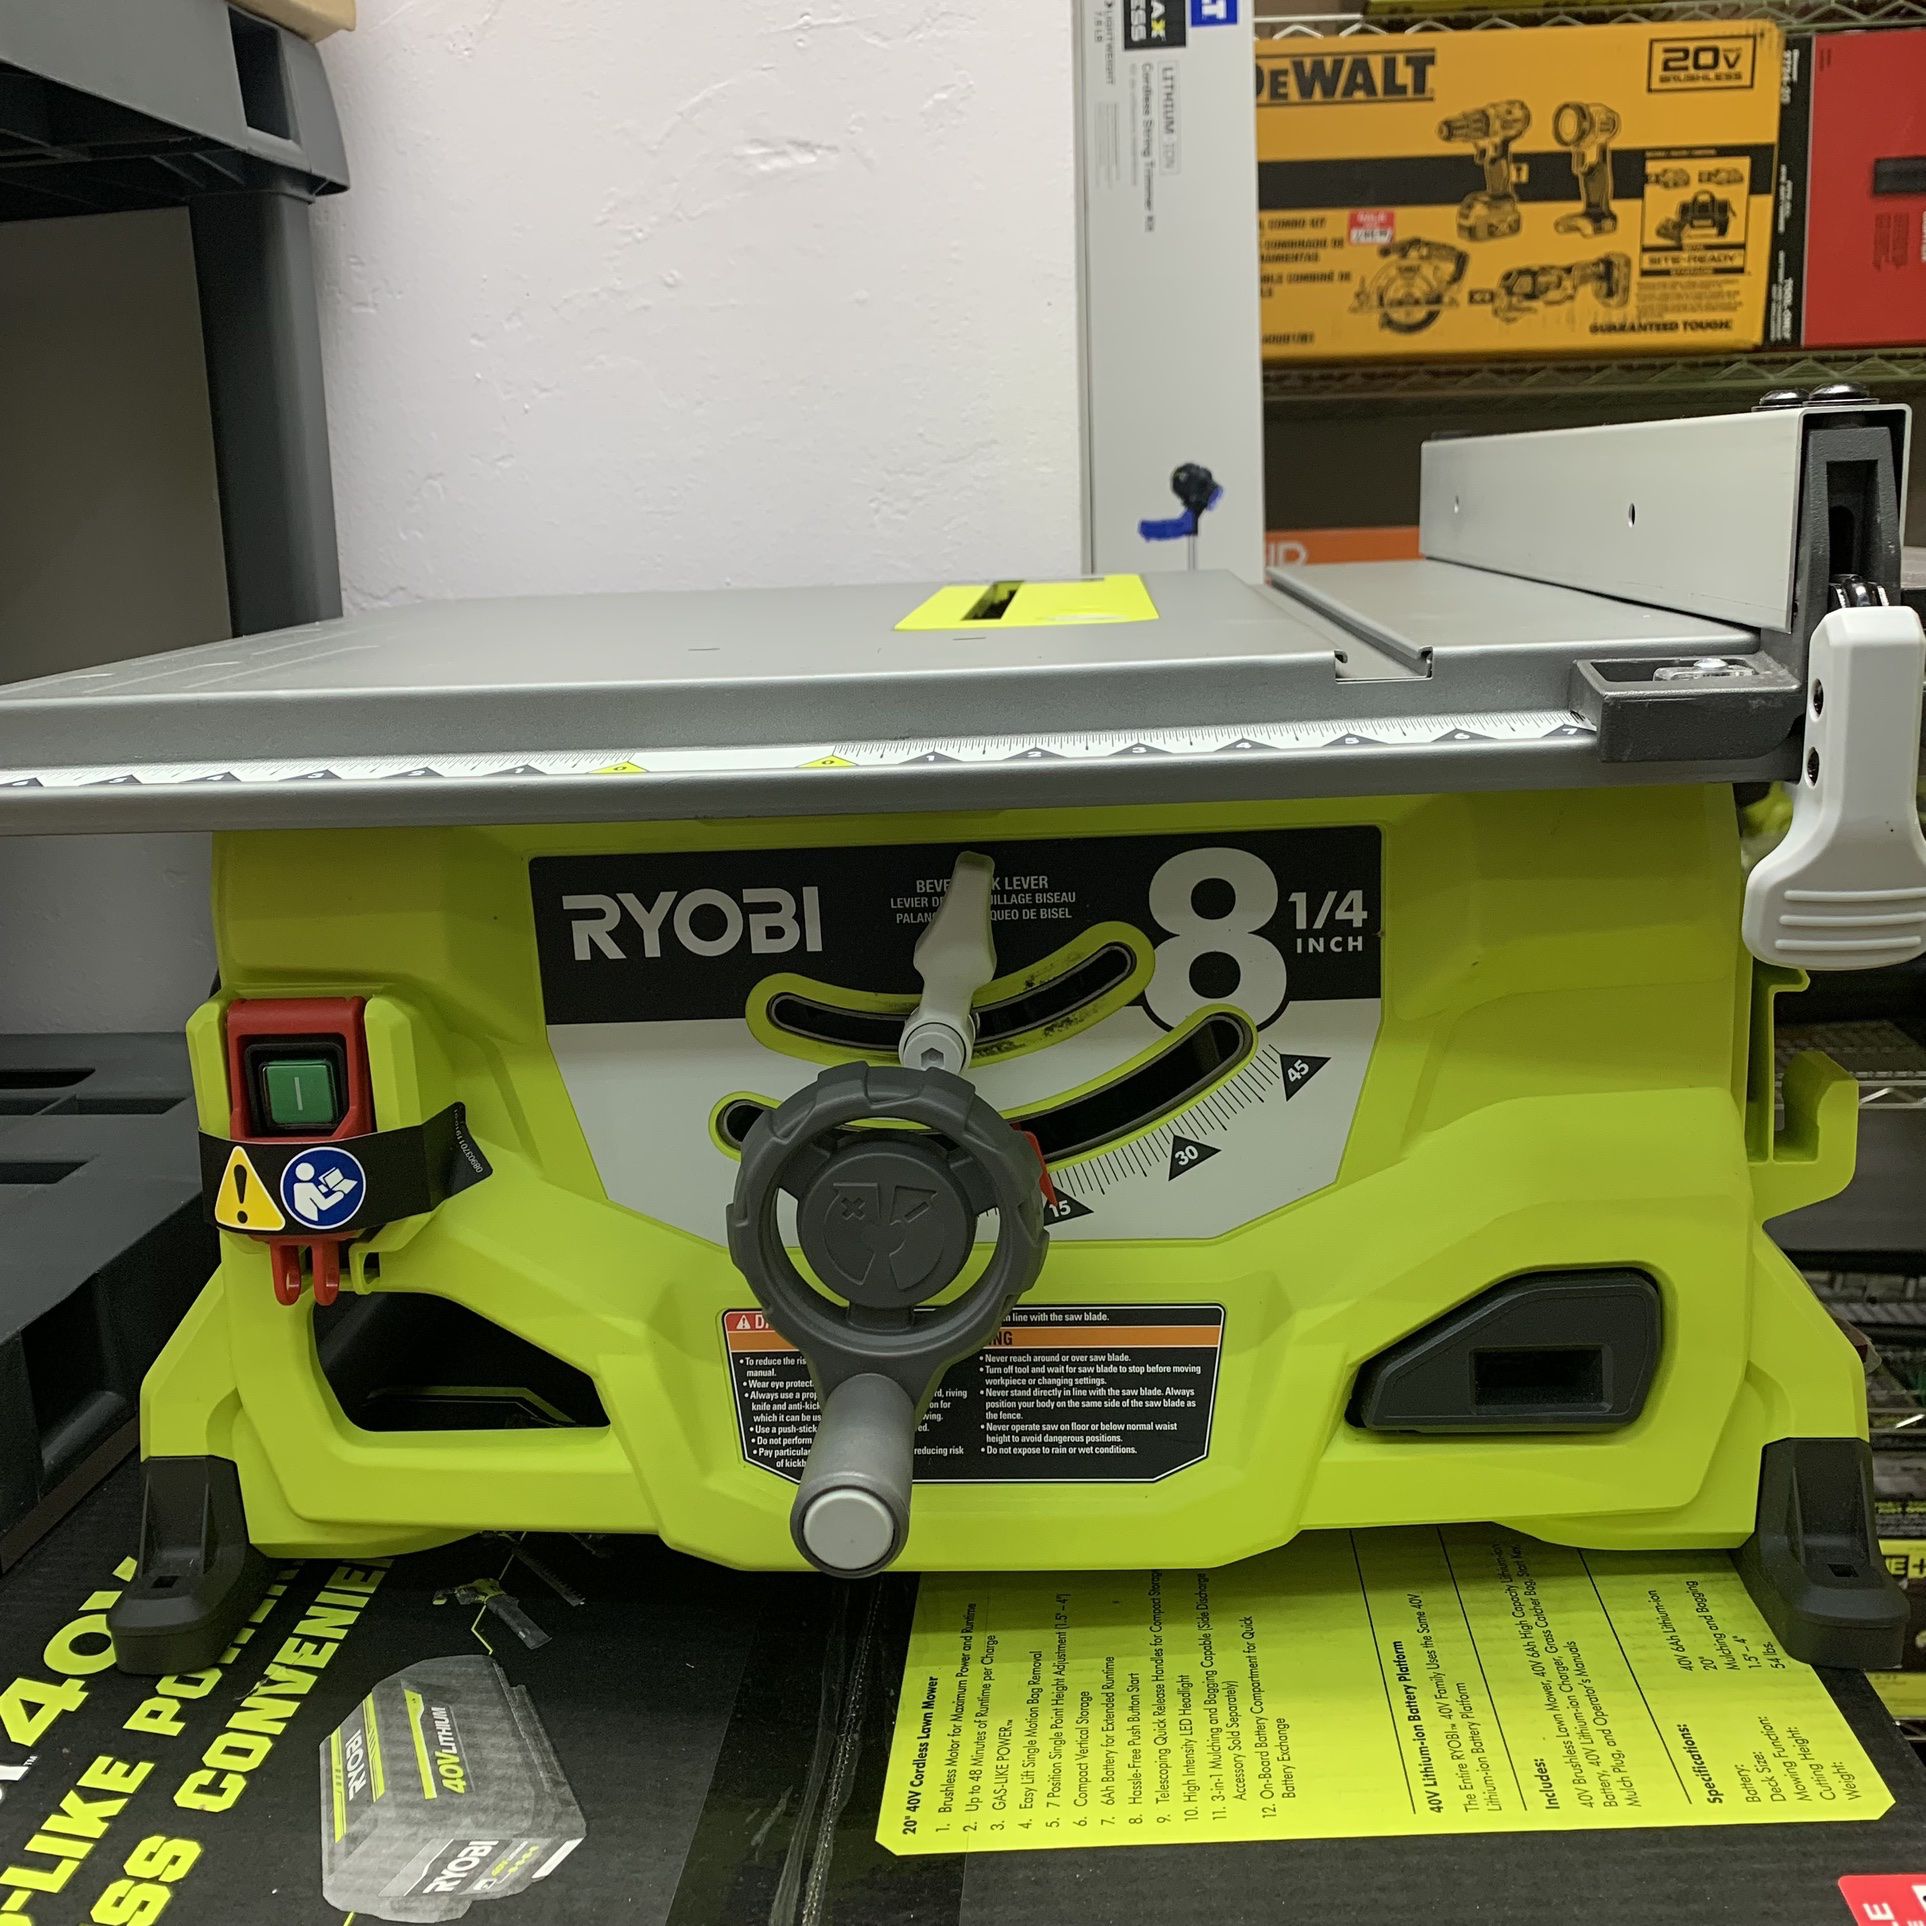 RYOBI RTS08 13 Amp 8-1/4 in. Table Saw (Factory Reconditioned to New) for  Sale in Nampa, ID OfferUp